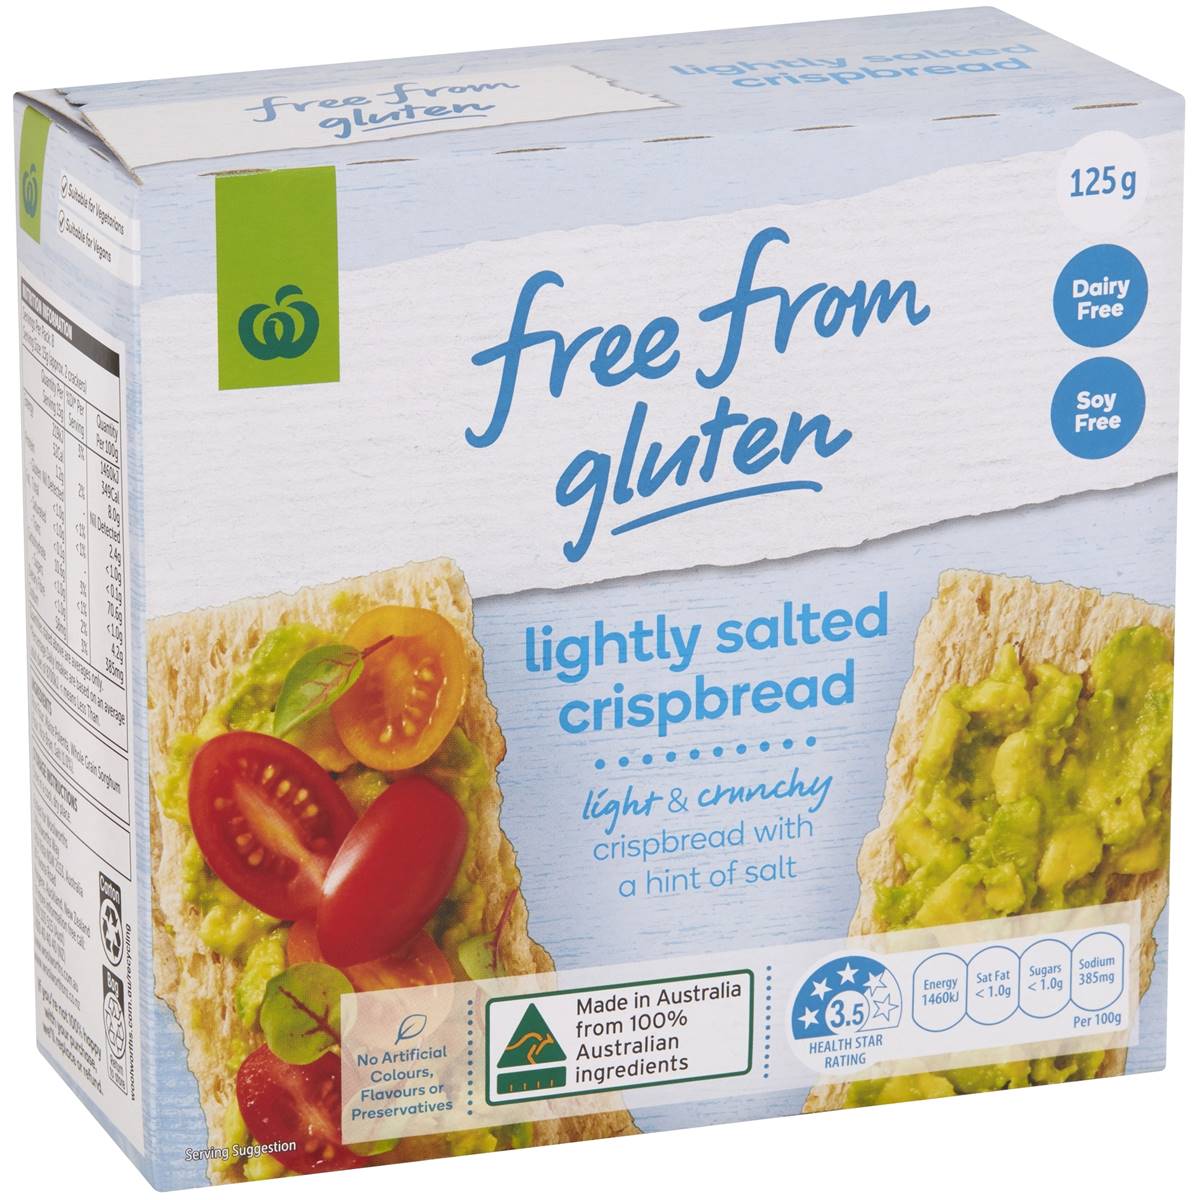 Calories in Woolworths Free From Gluten Lightly Salted Crispbread